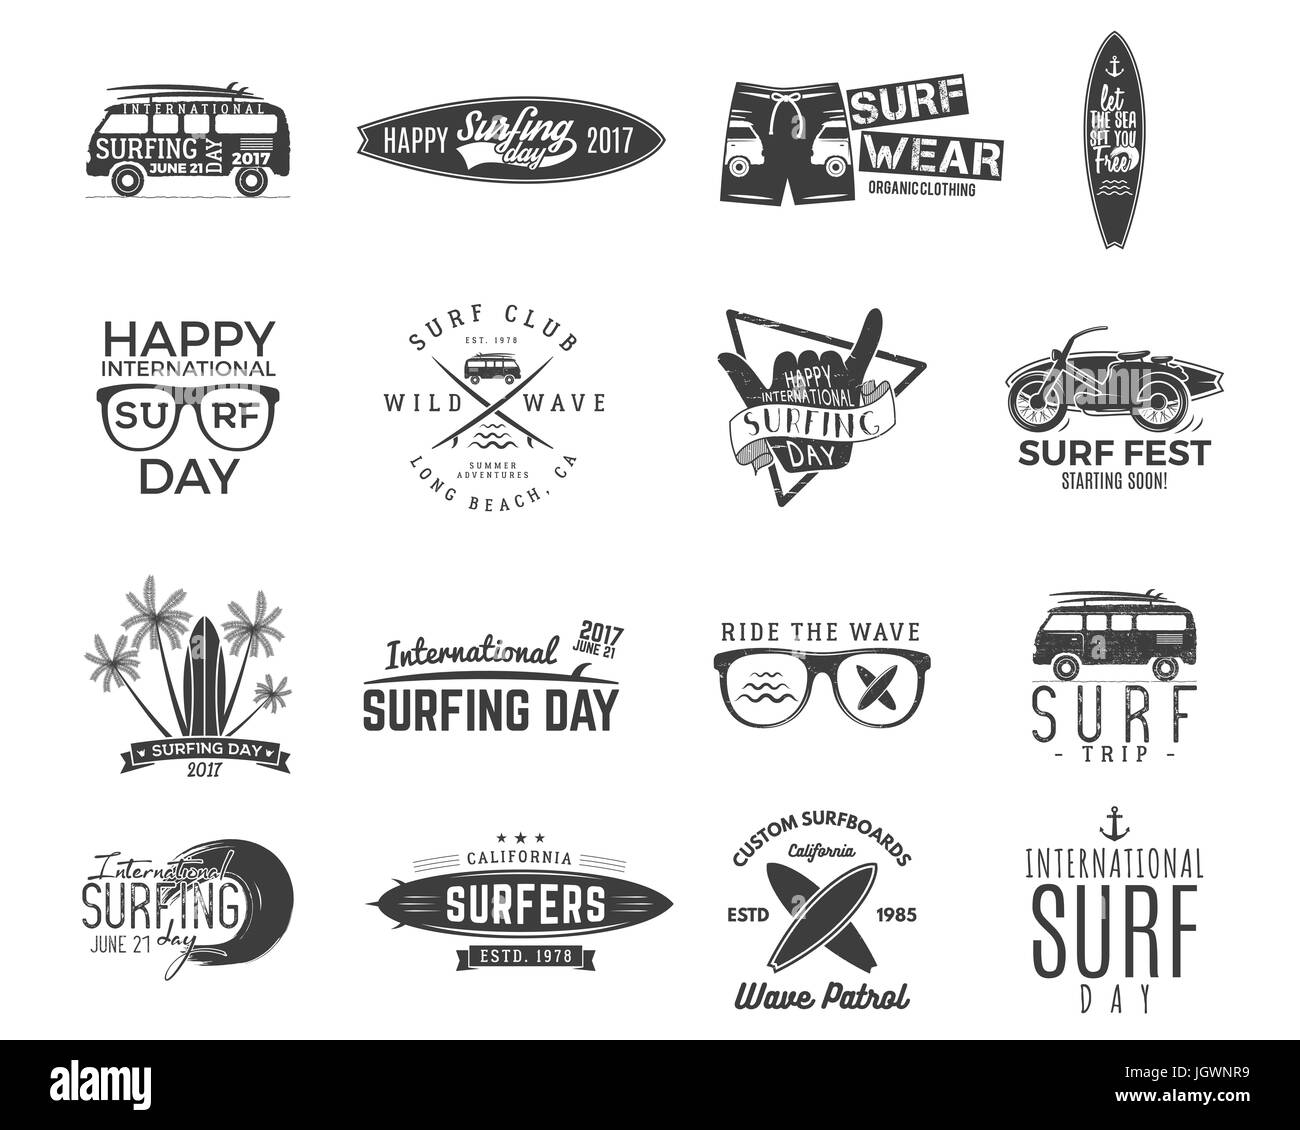 Vintage surfing graphics and emblems set for web design or print. Surfer, beach style logo design. Surf Badge. Surfboard seal, elements, symbols. Summer boarding on waves. hipster insignias Stock Photo